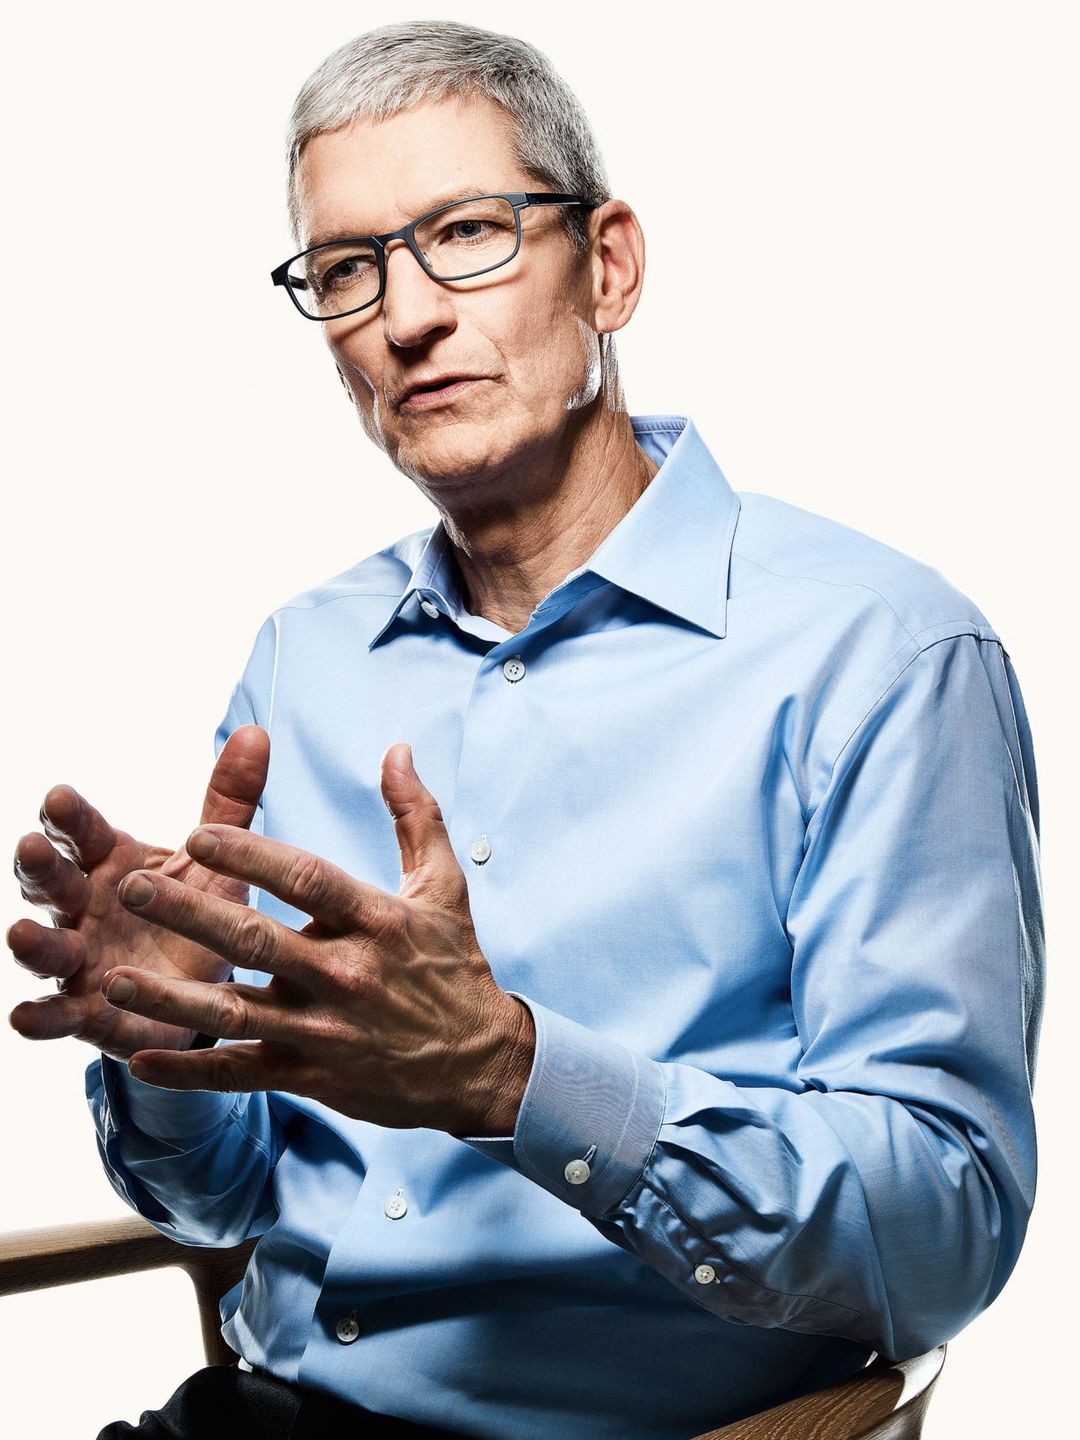 Tim Cook height and weight